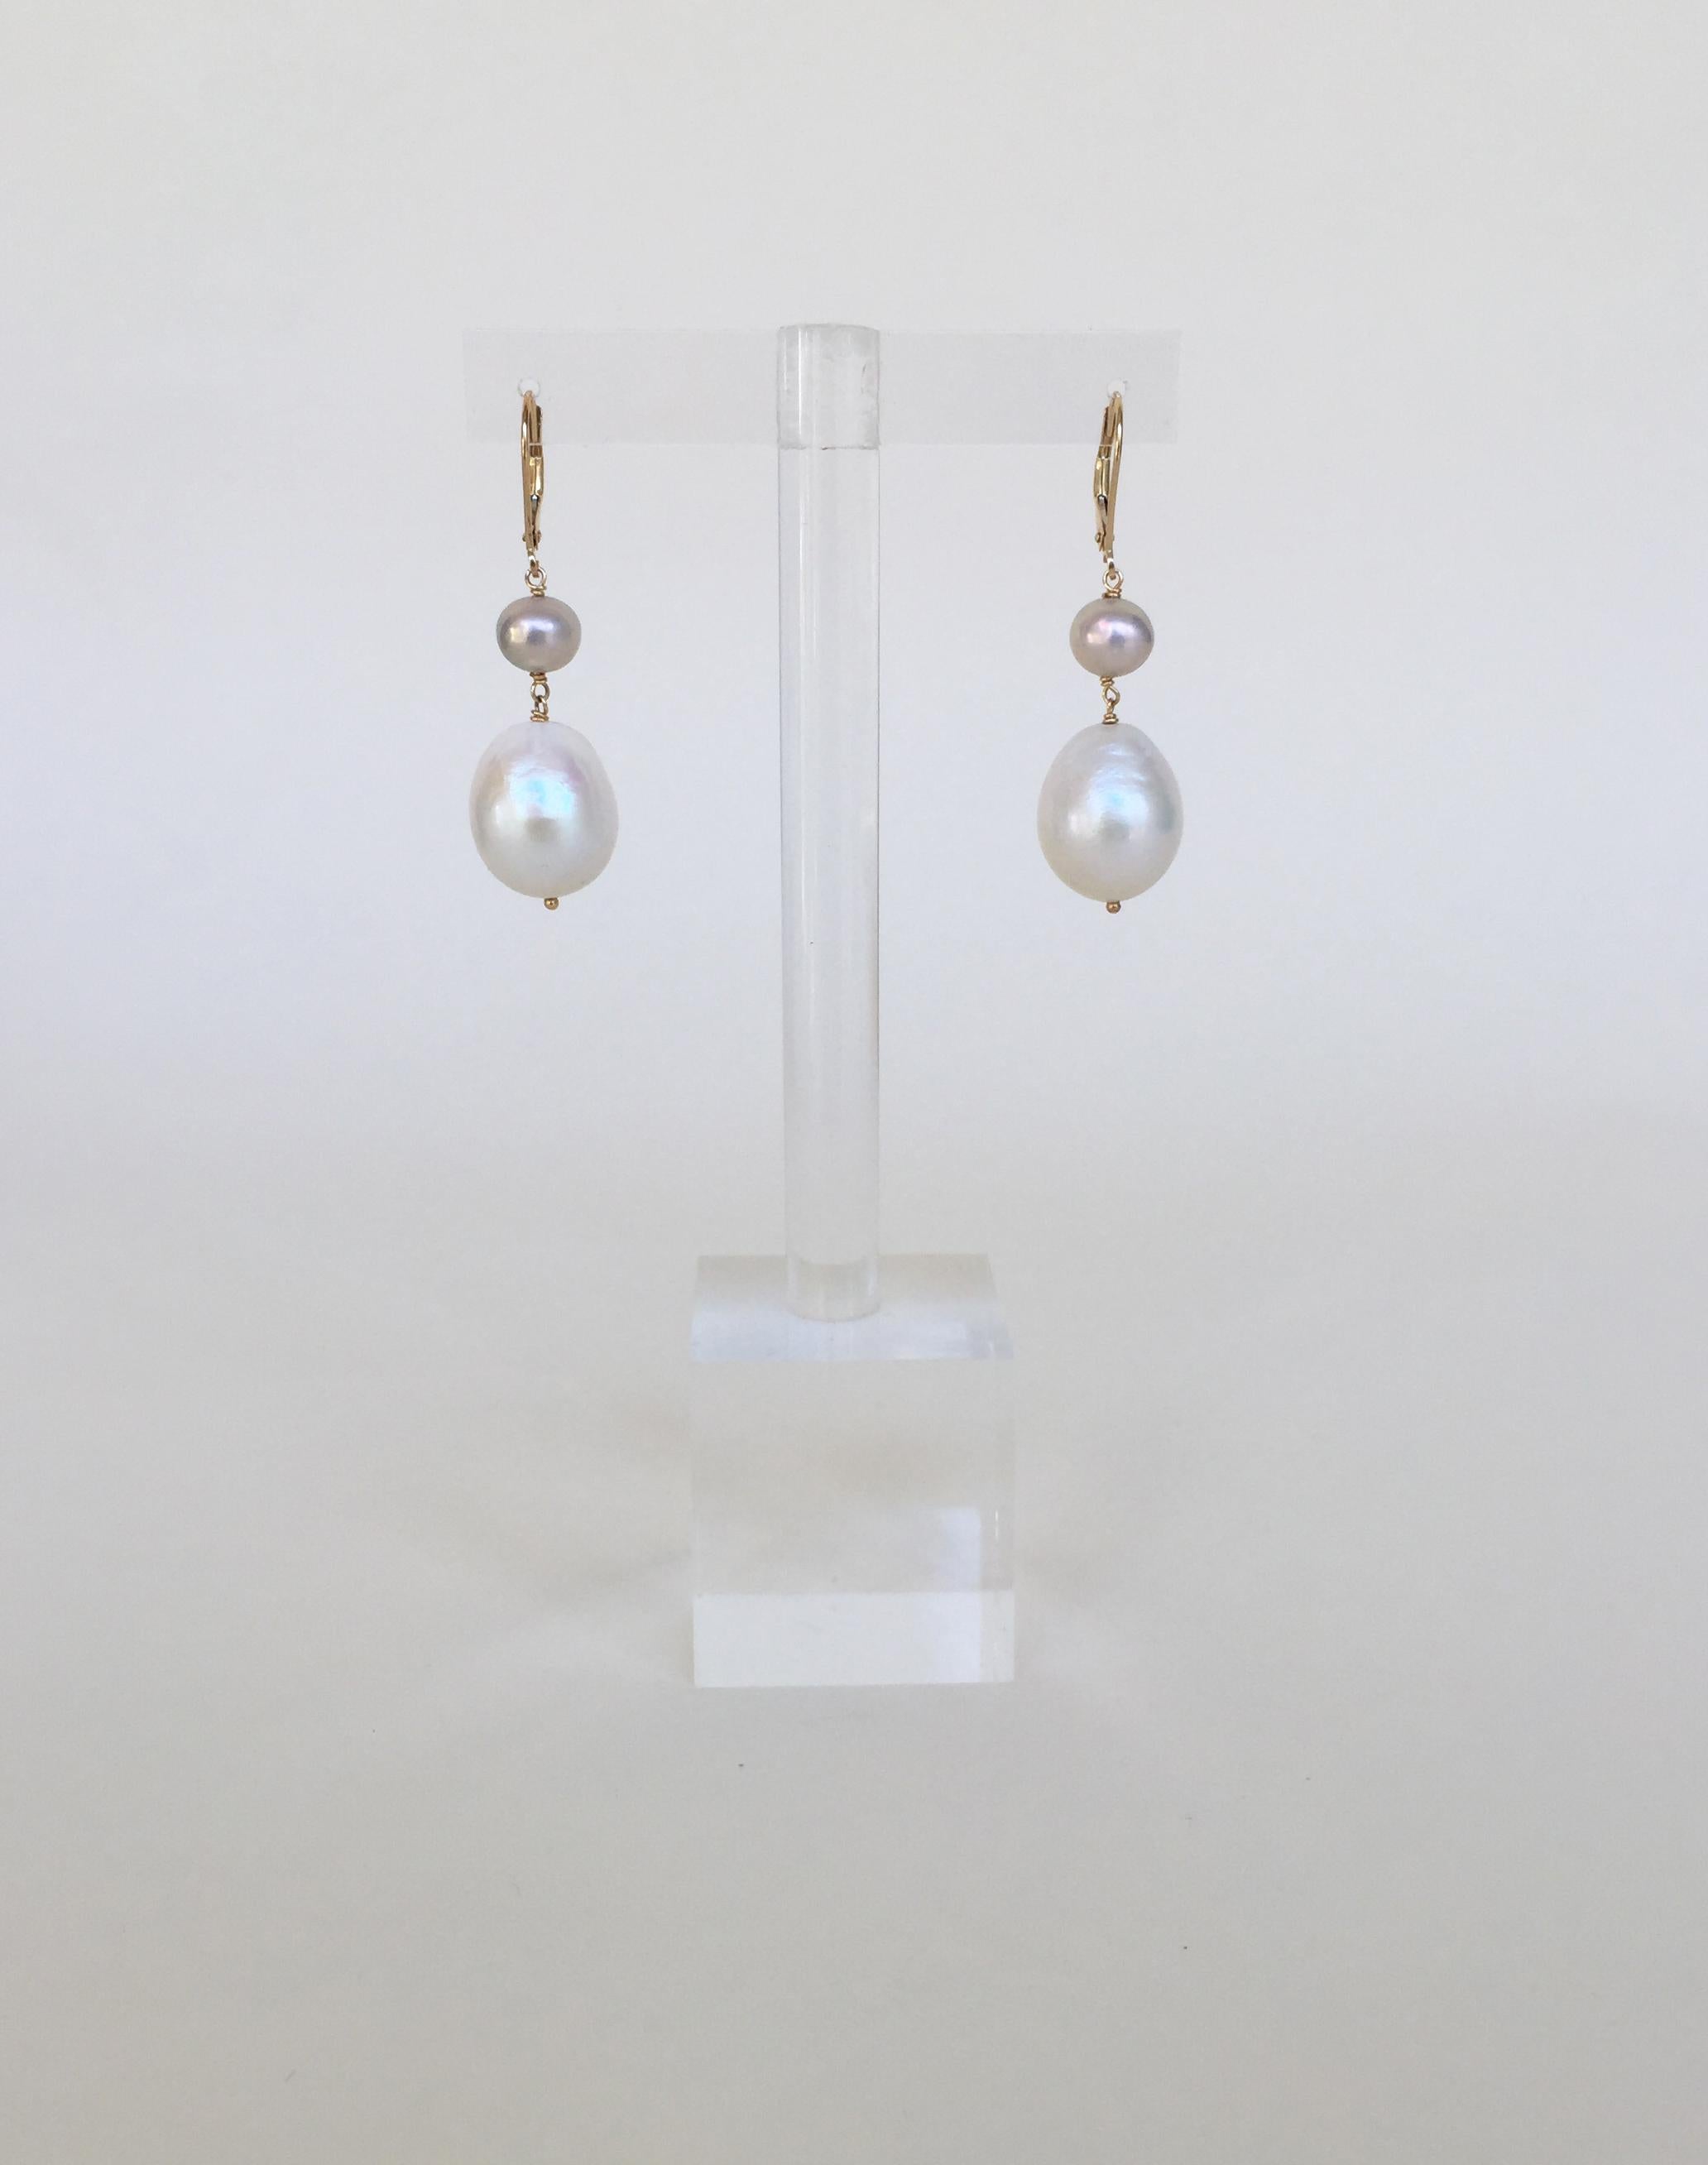 These white and grey pearl drop earrings with 14k yellow gold lever backs glow in the light. The large oval white pearl and small round light pink tinted grey pearl complete each other, for a timeless and elegant look. The 14k yellow gold lever